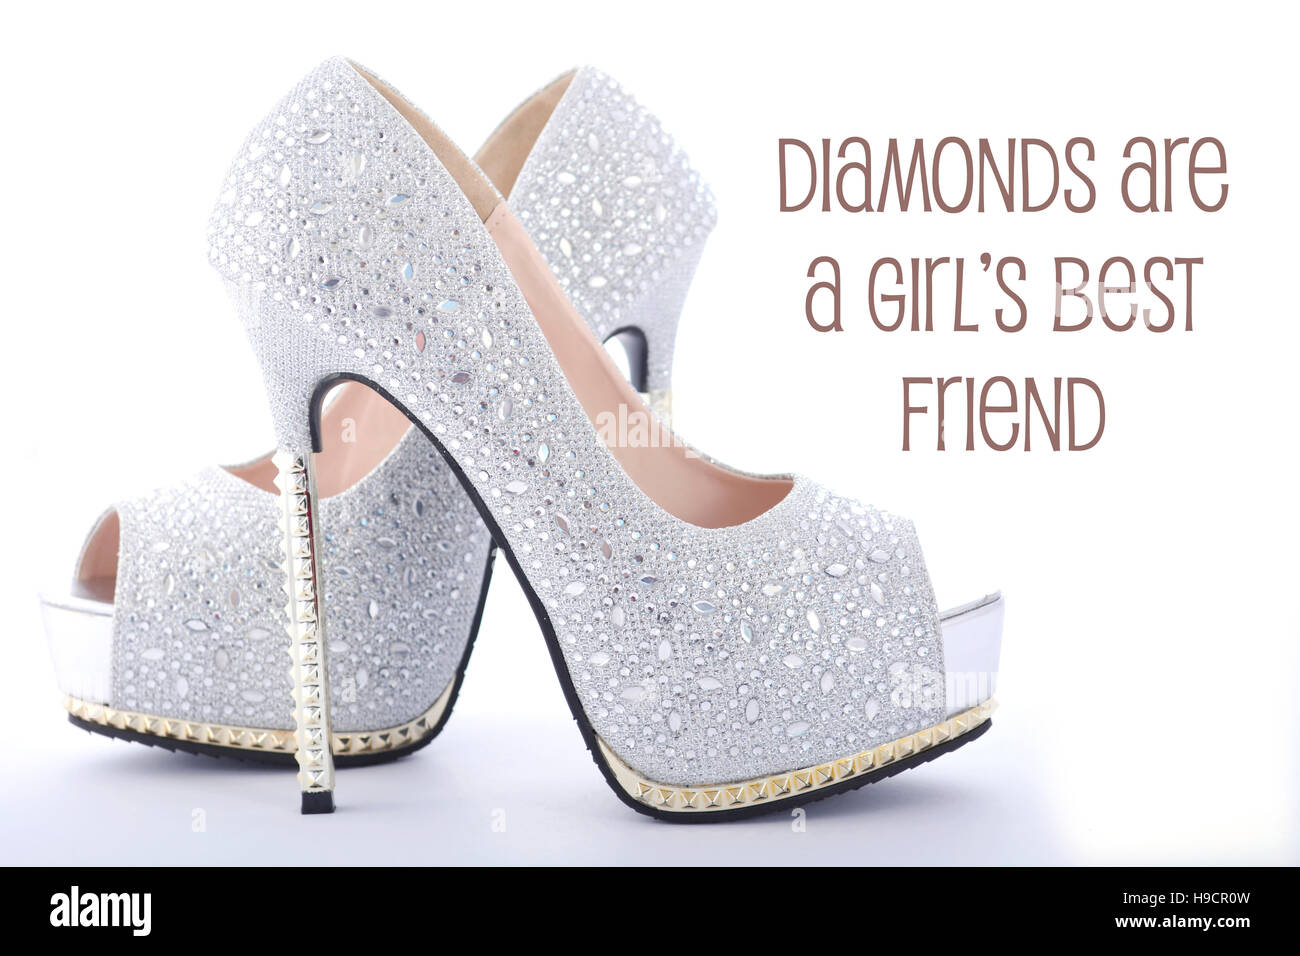 High heel rhinestone stiletto shoes with funny saying, Diamonds Are a Girls Best Friend. Stock Photo